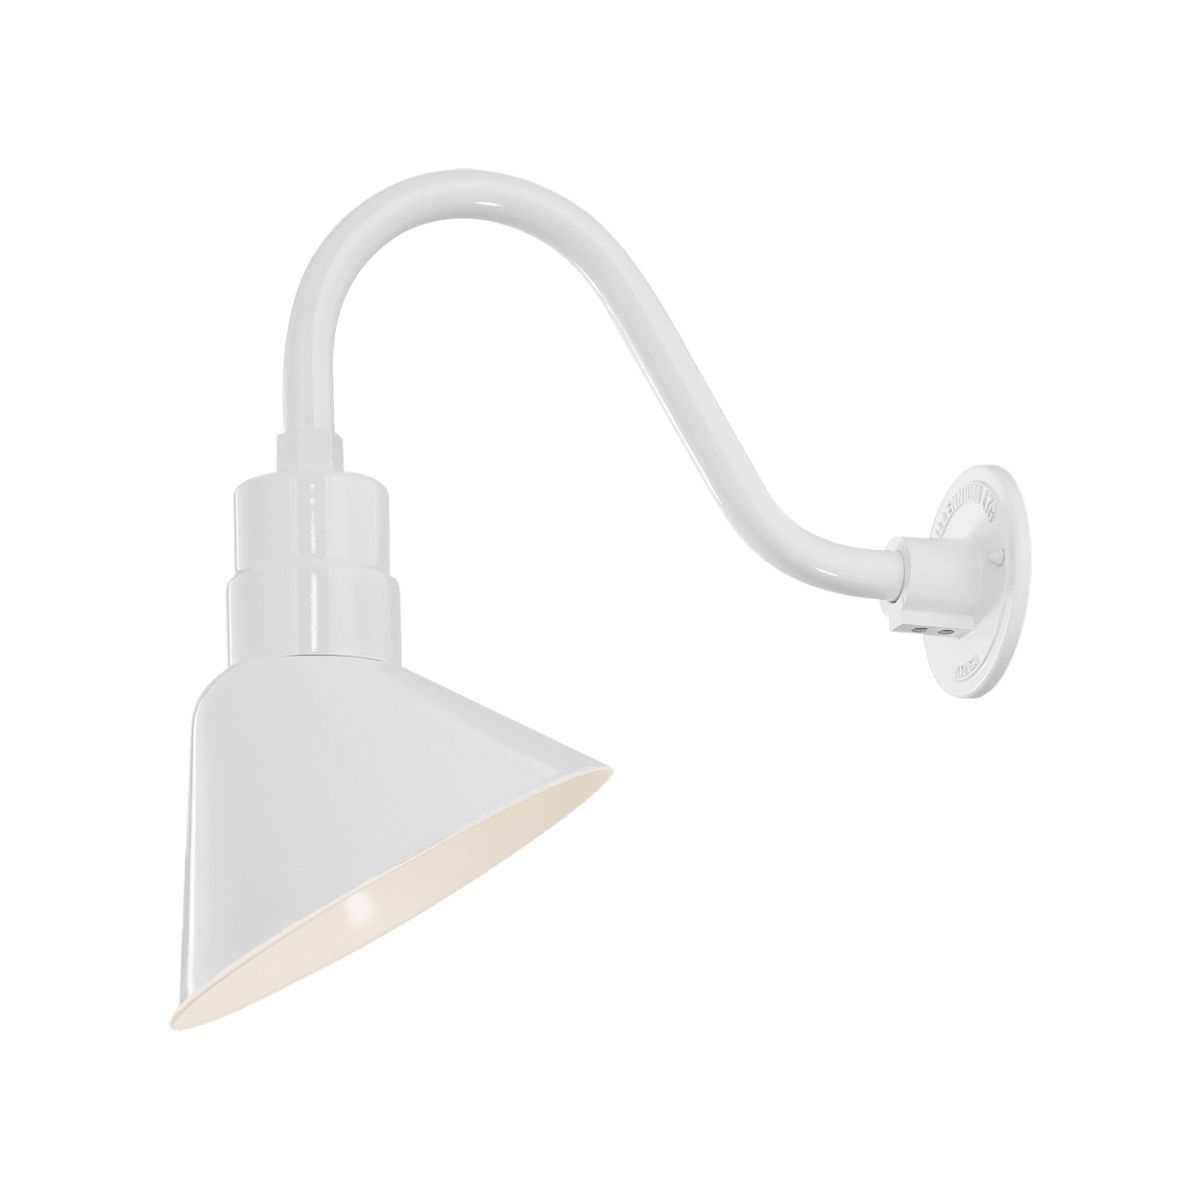 R series 10 In. Outdoor Angle Shade with 3/4 In. Fitter - Bees Lighting